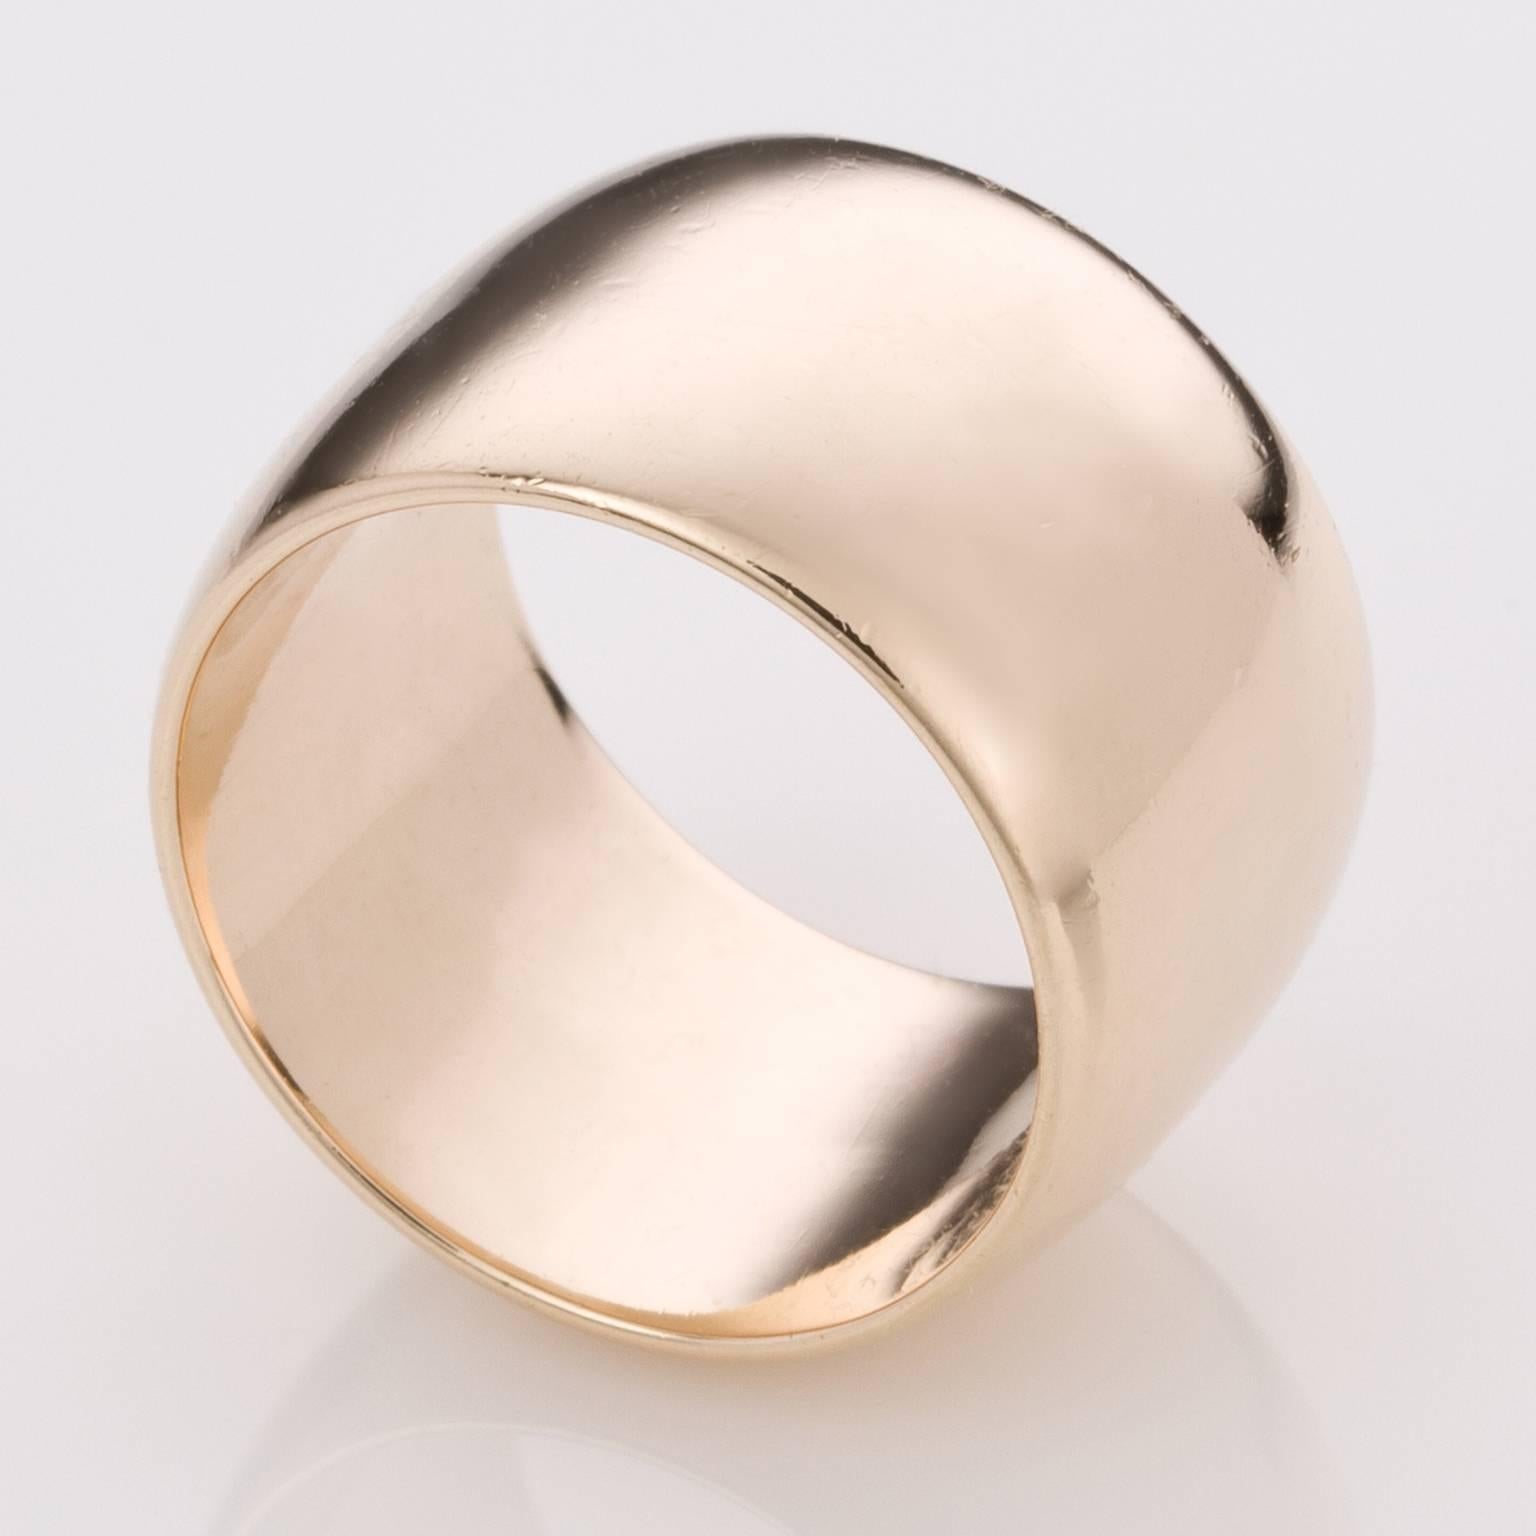 Simple and stylish, this lovely 18k yellow gold wide ring is so beautiful to wear either on its own or with some slender diamond bands either side. 
Either way, its a statement ring with a timeless appeal.  It has a slightly curved appearance and is